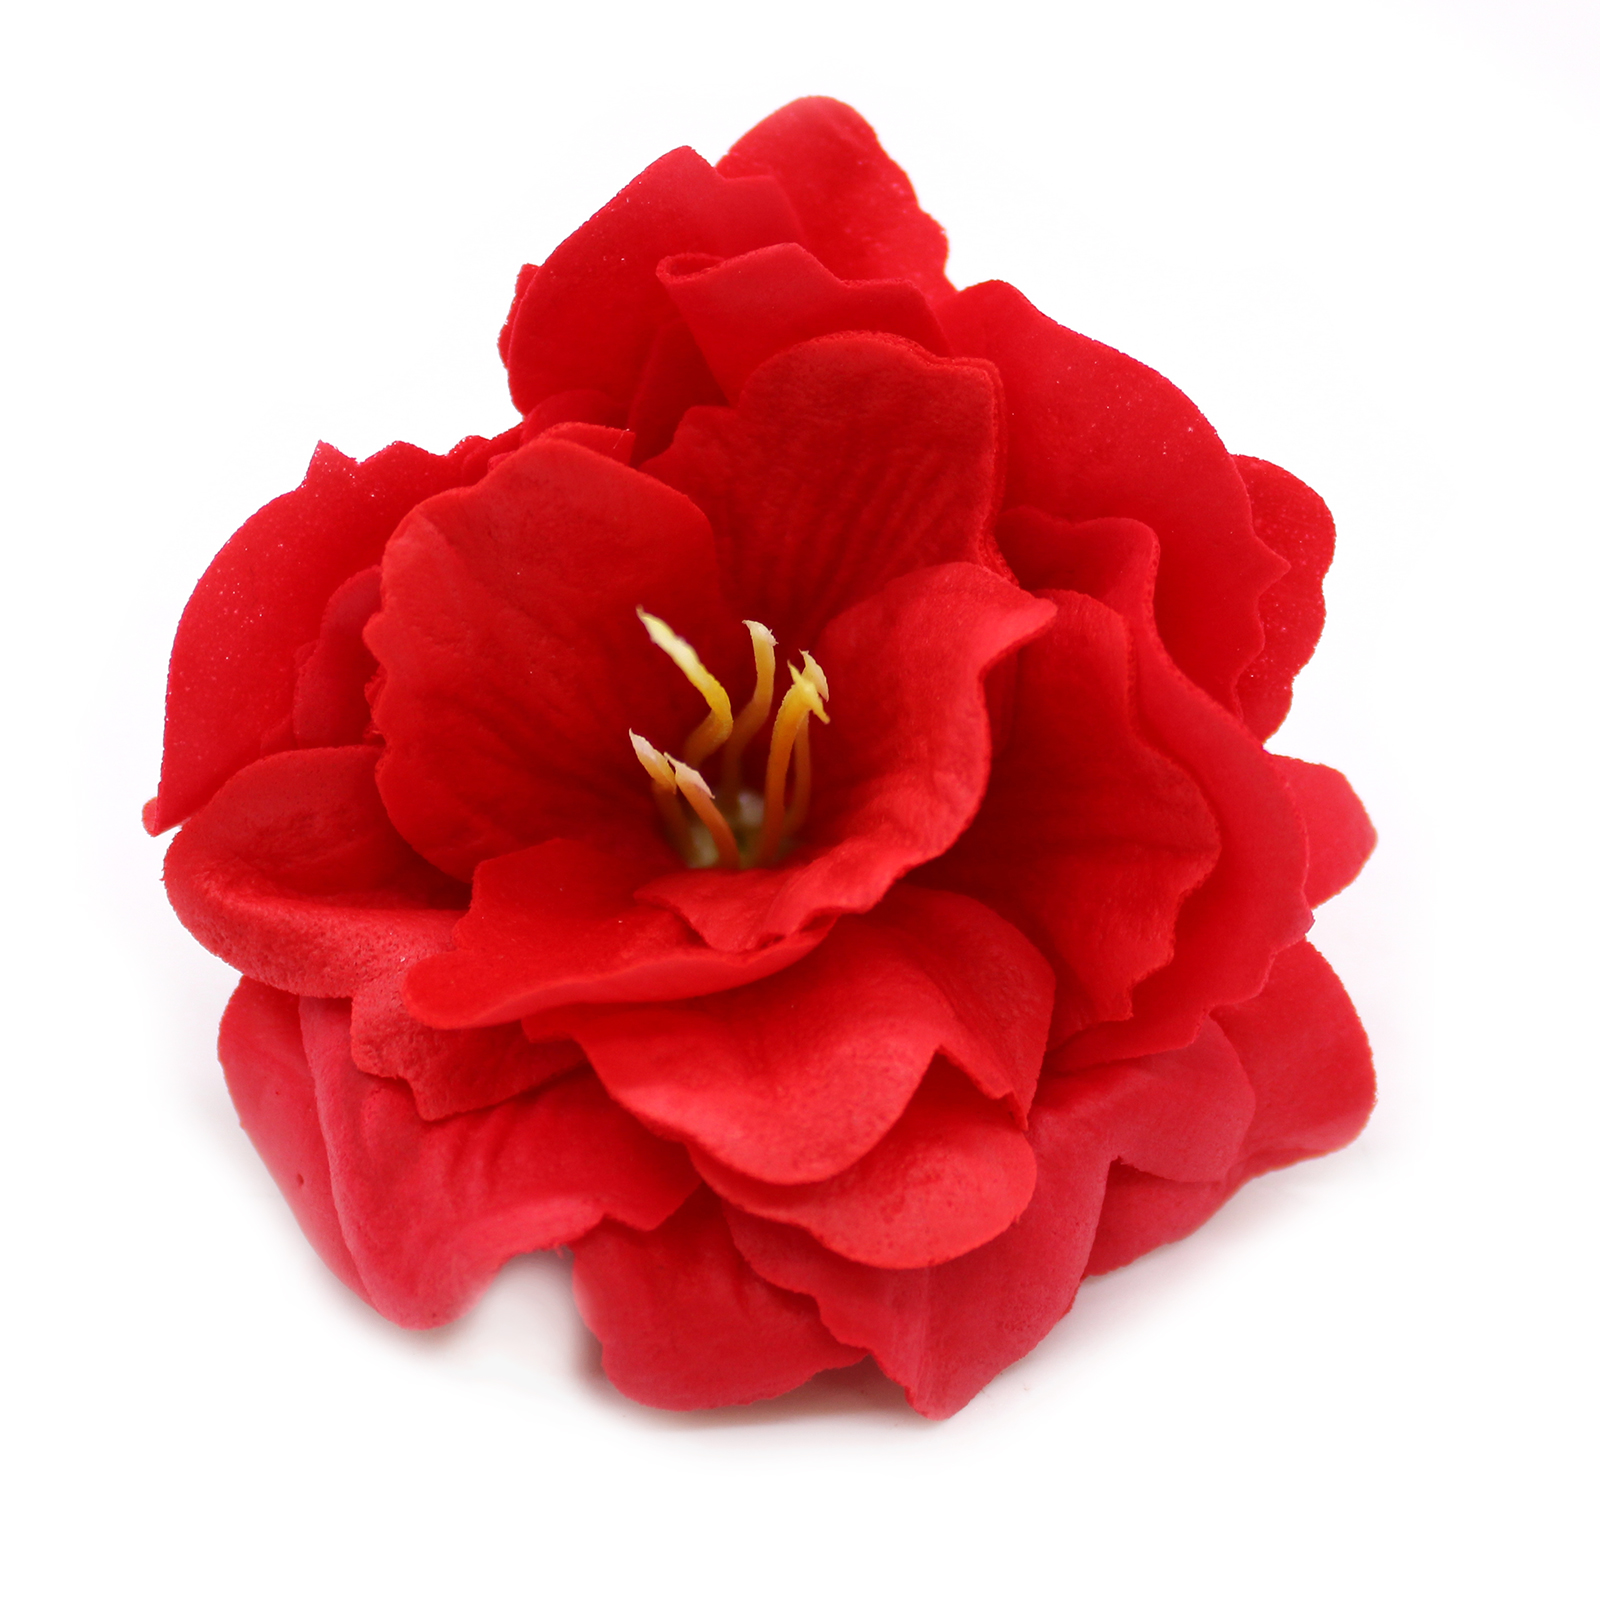 10 x Craft Soap Flowers - Small Peony - Red